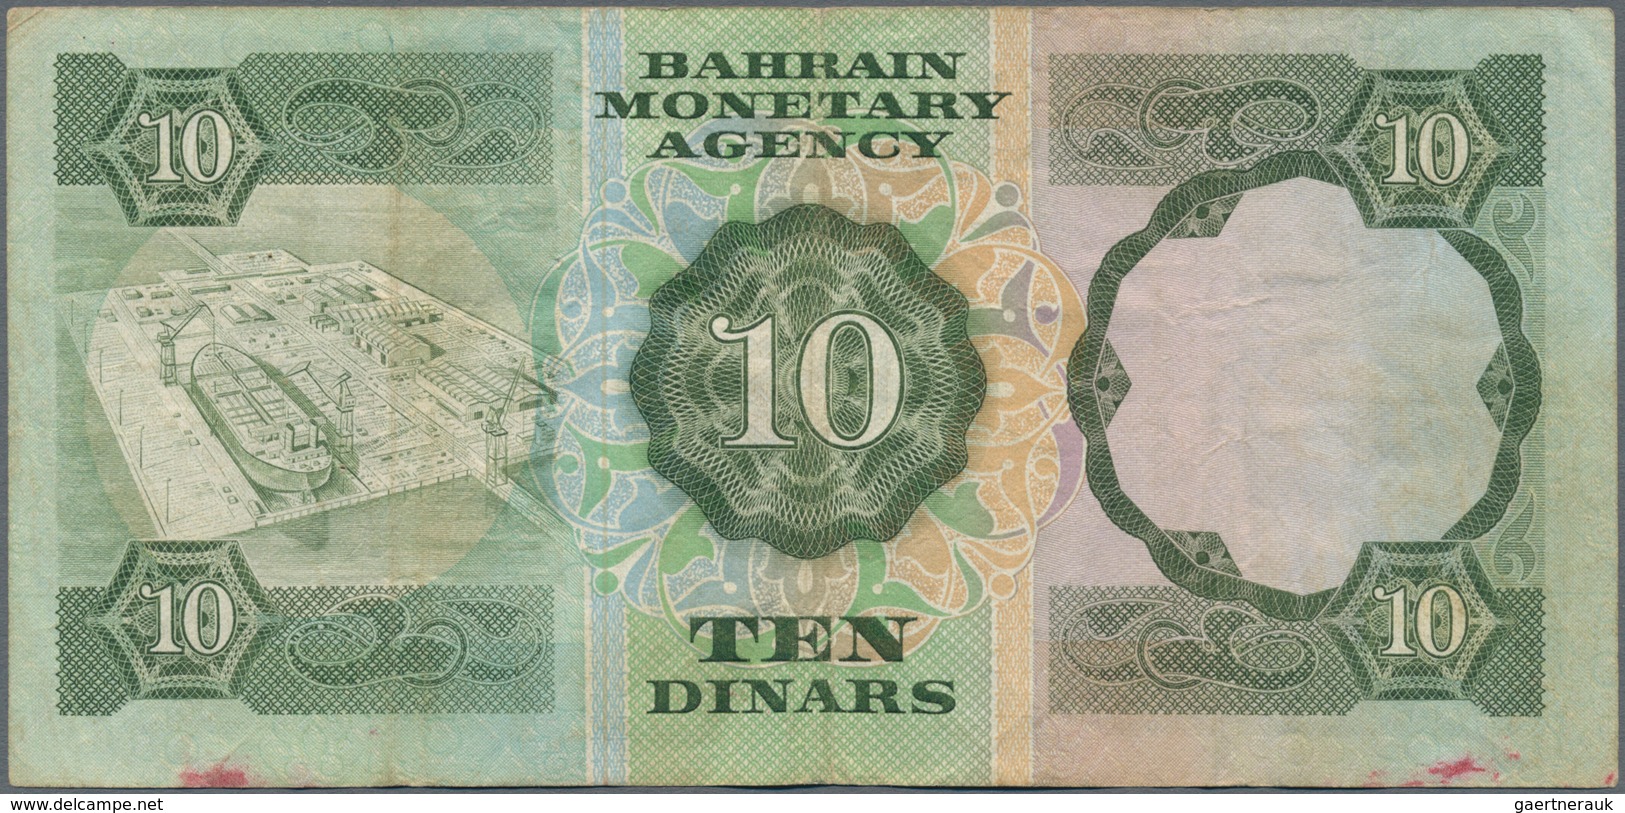 Bahrain: Bahrain Monetary Agency 10 Dinars L.1973, P.9, Still Strong Paper With A Several Folds And - Bahrein